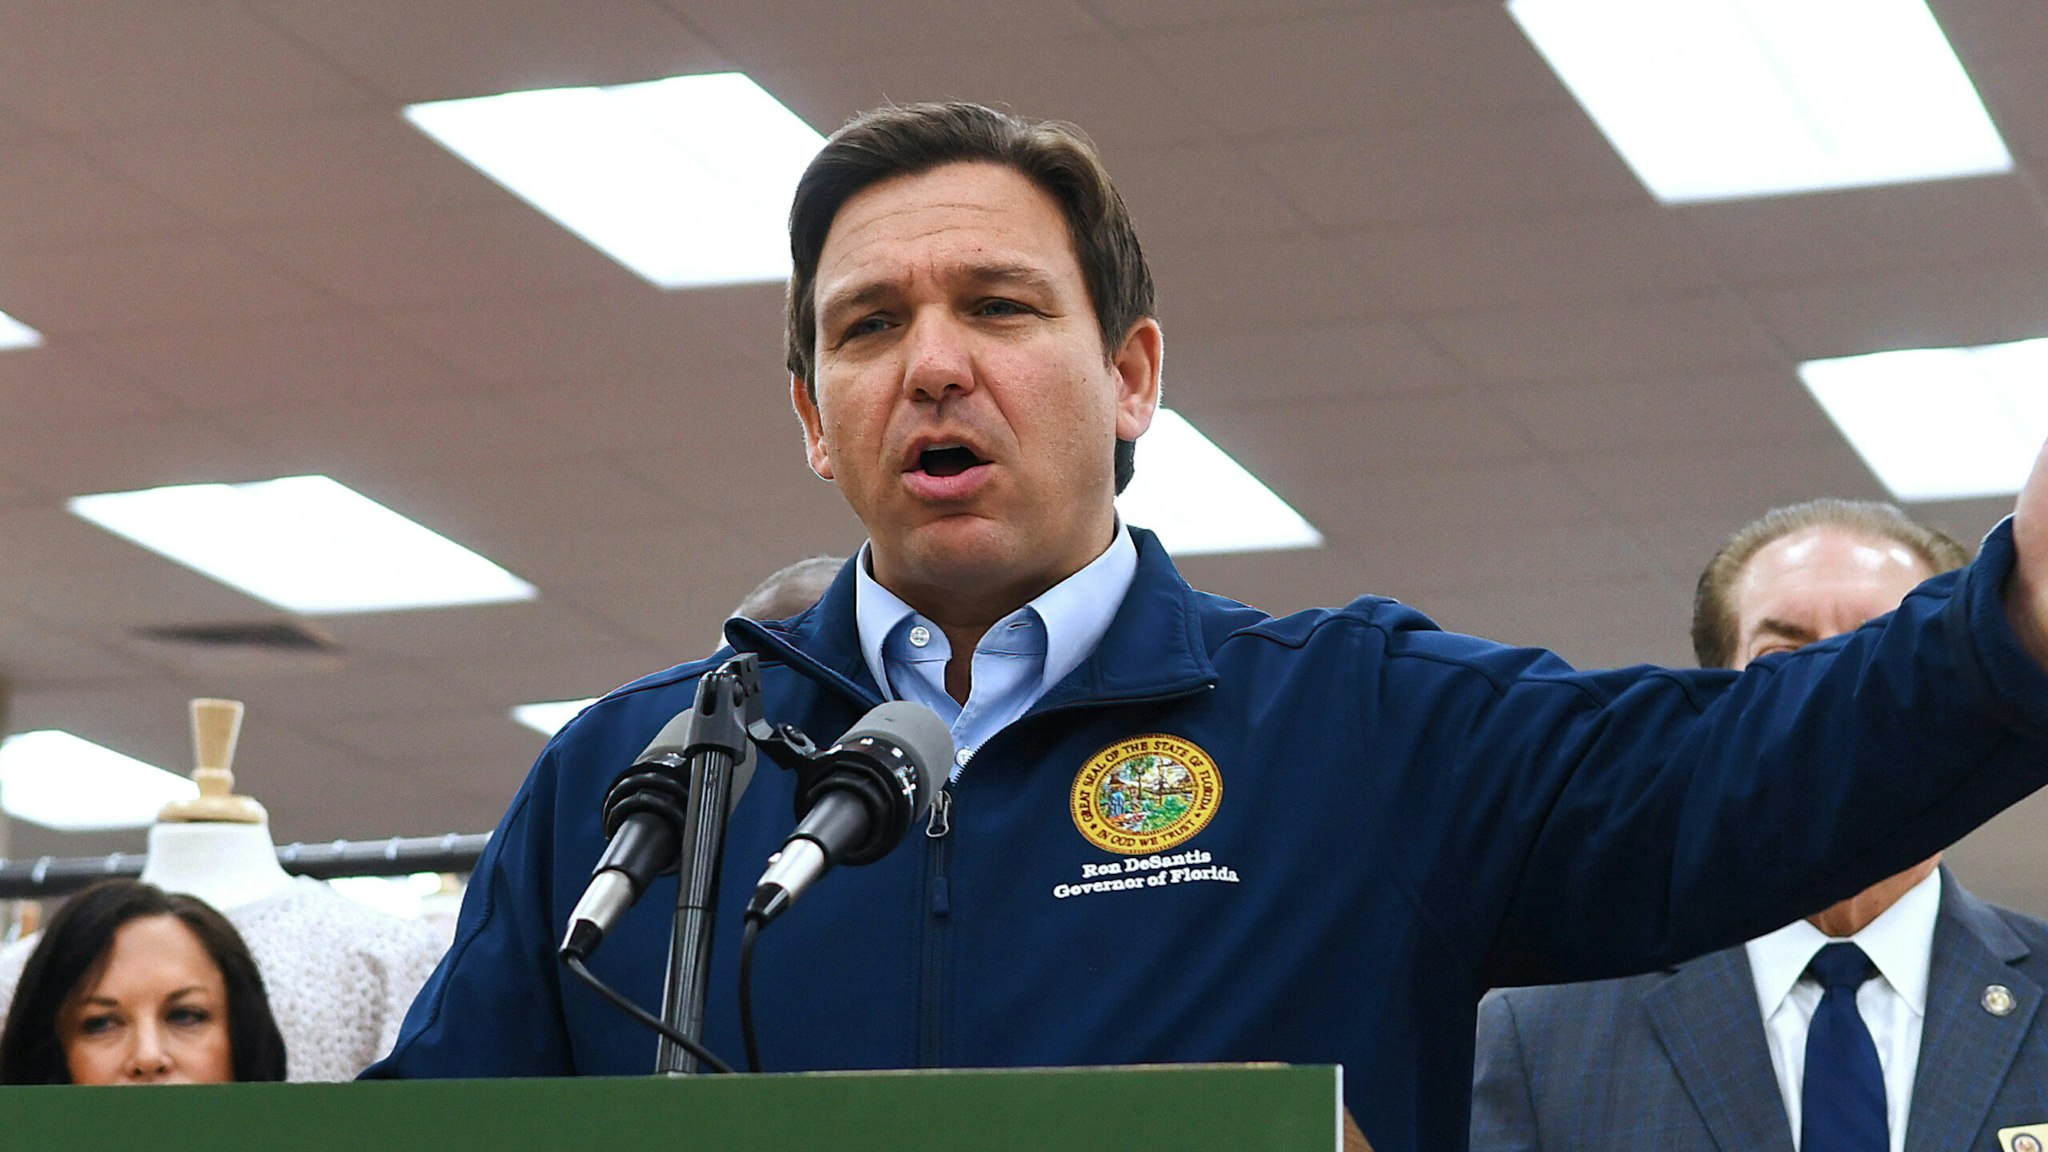 DAYTONA BEACH, FLORIDA, UNITED STATES - 2021/11/22: Florida Gov. Ron DeSantis speaks at a press conference at Buc-ee's travel center, where he announced his proposal of more than $1 billion in gas tax relief for Floridians in response to rising gas prices caused by inflation. DeSantis is proposing to the Florida legislature a five-month gas tax holiday.